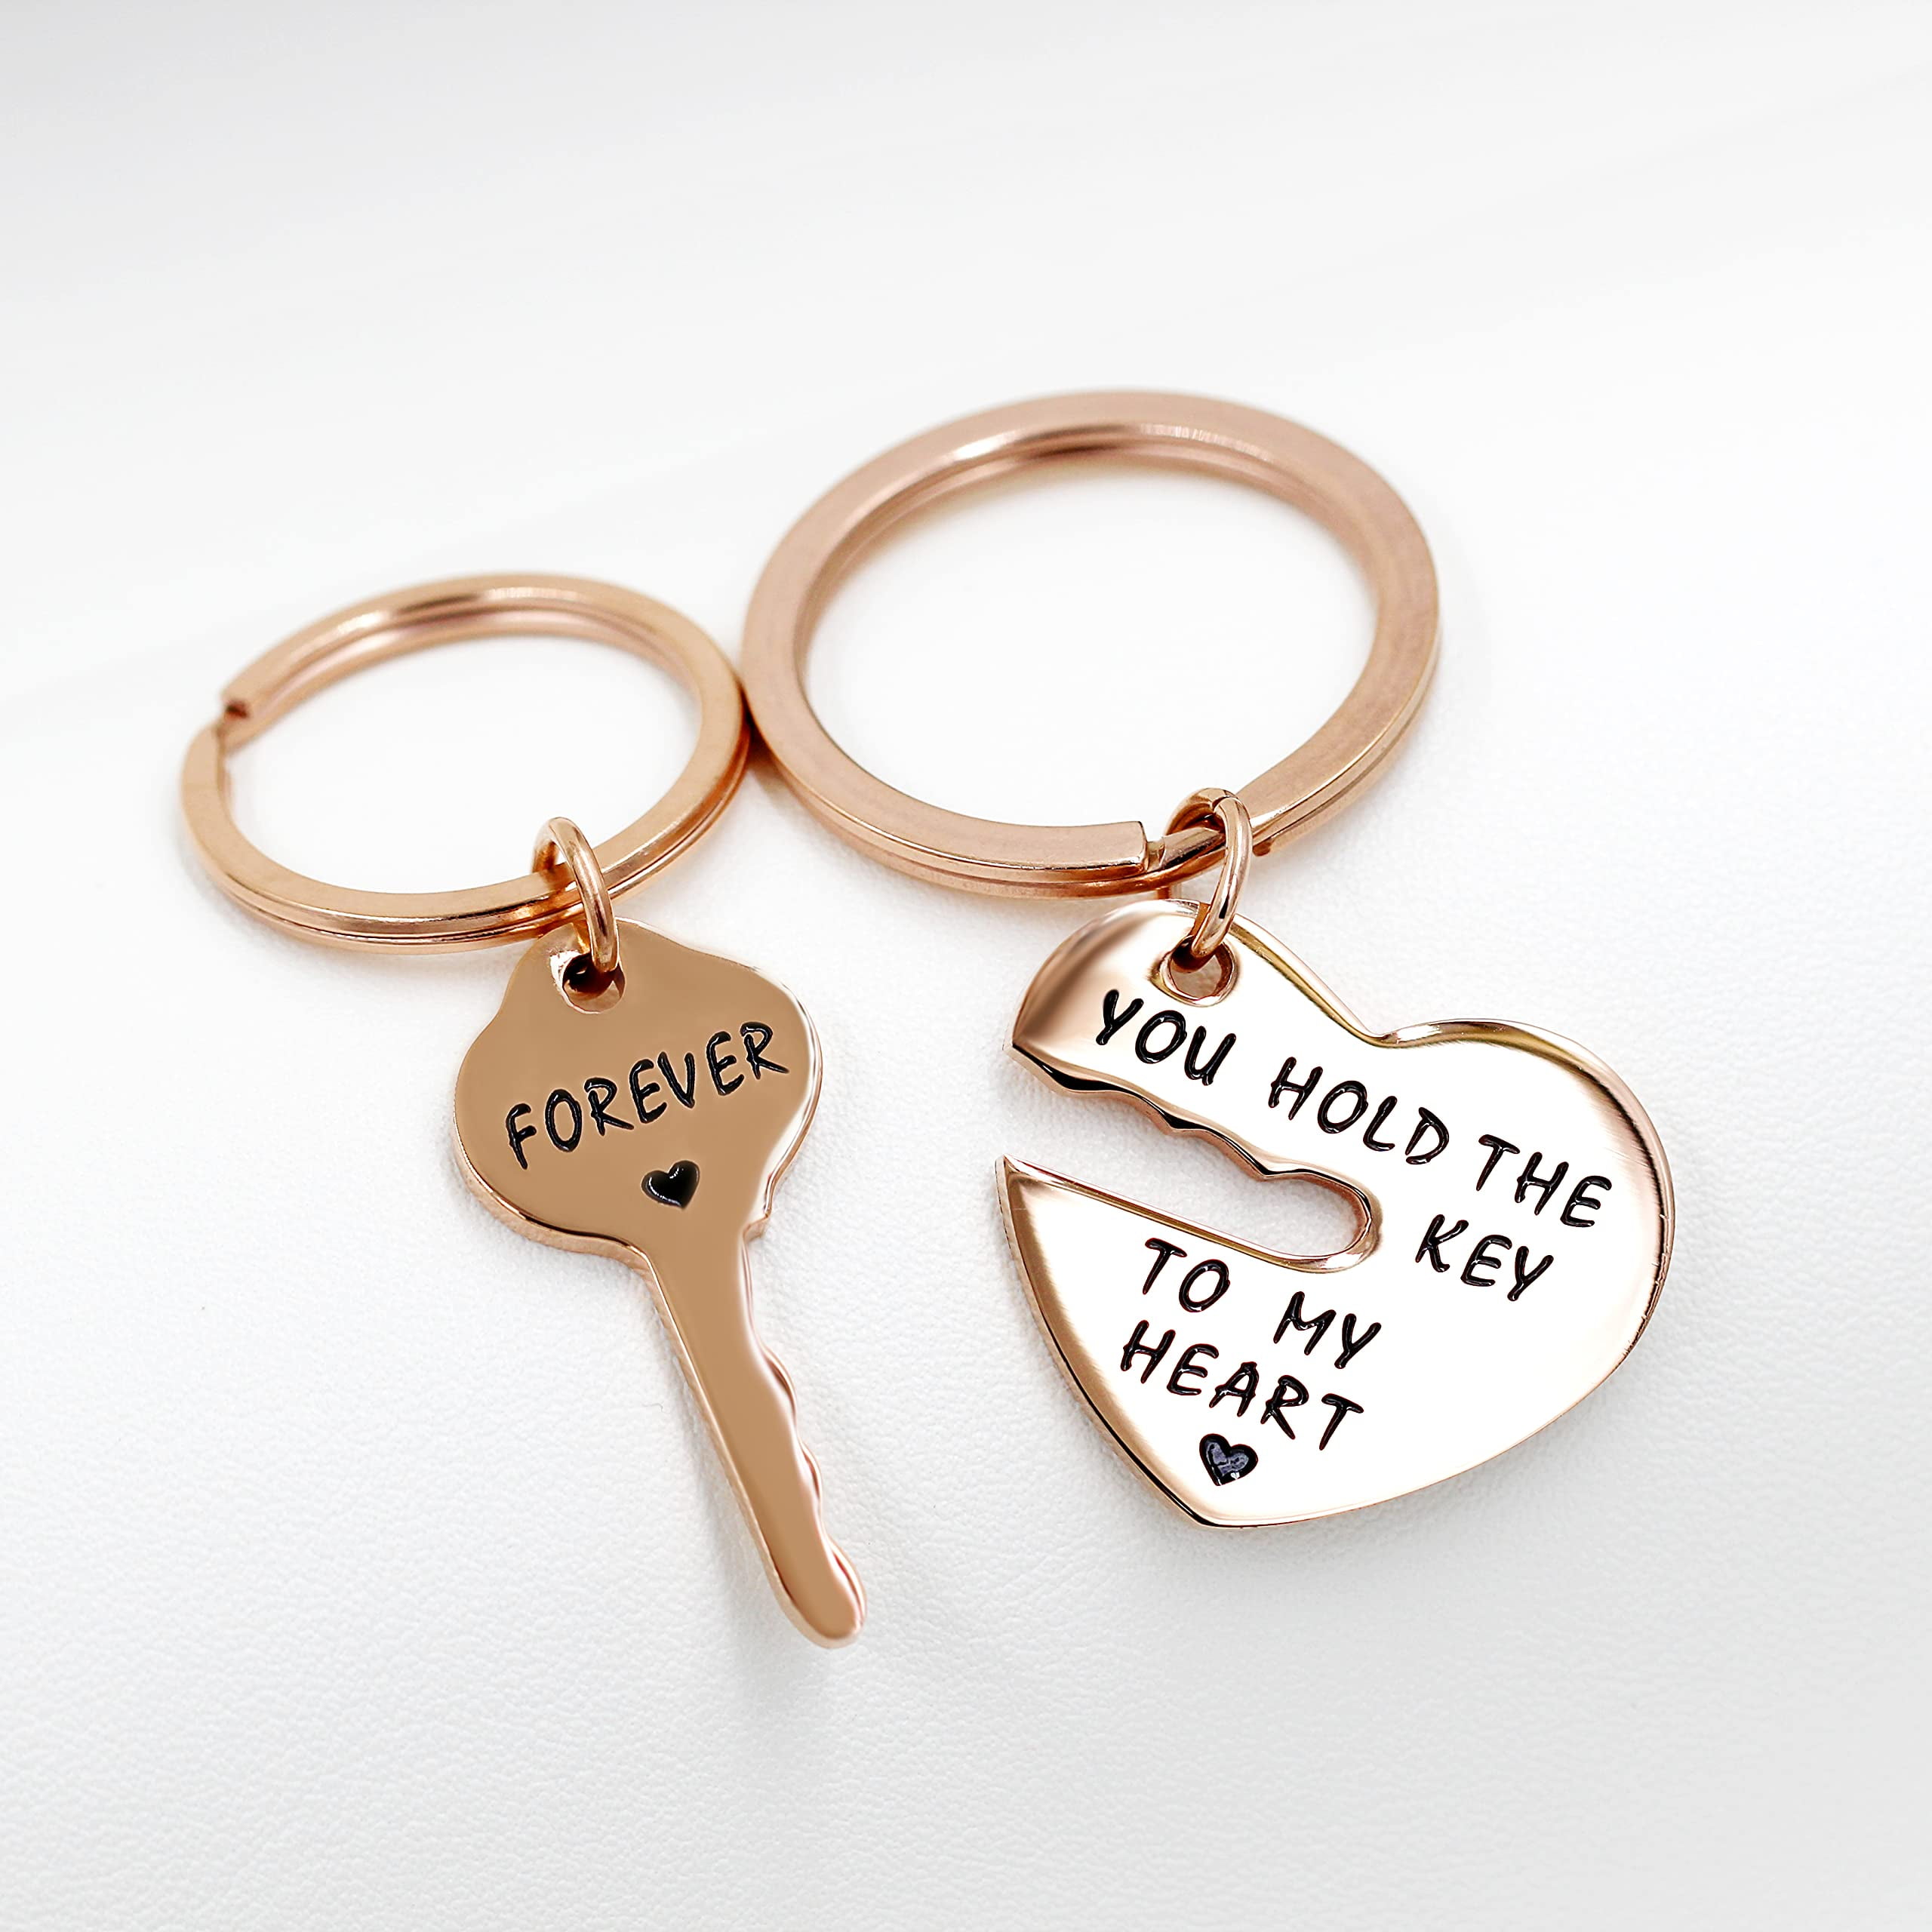 Wrapsify Heart Couple Keychains - Nothing Makes Sense When We're Apart - Gkh14019 Buy with Handmade Gift Box +